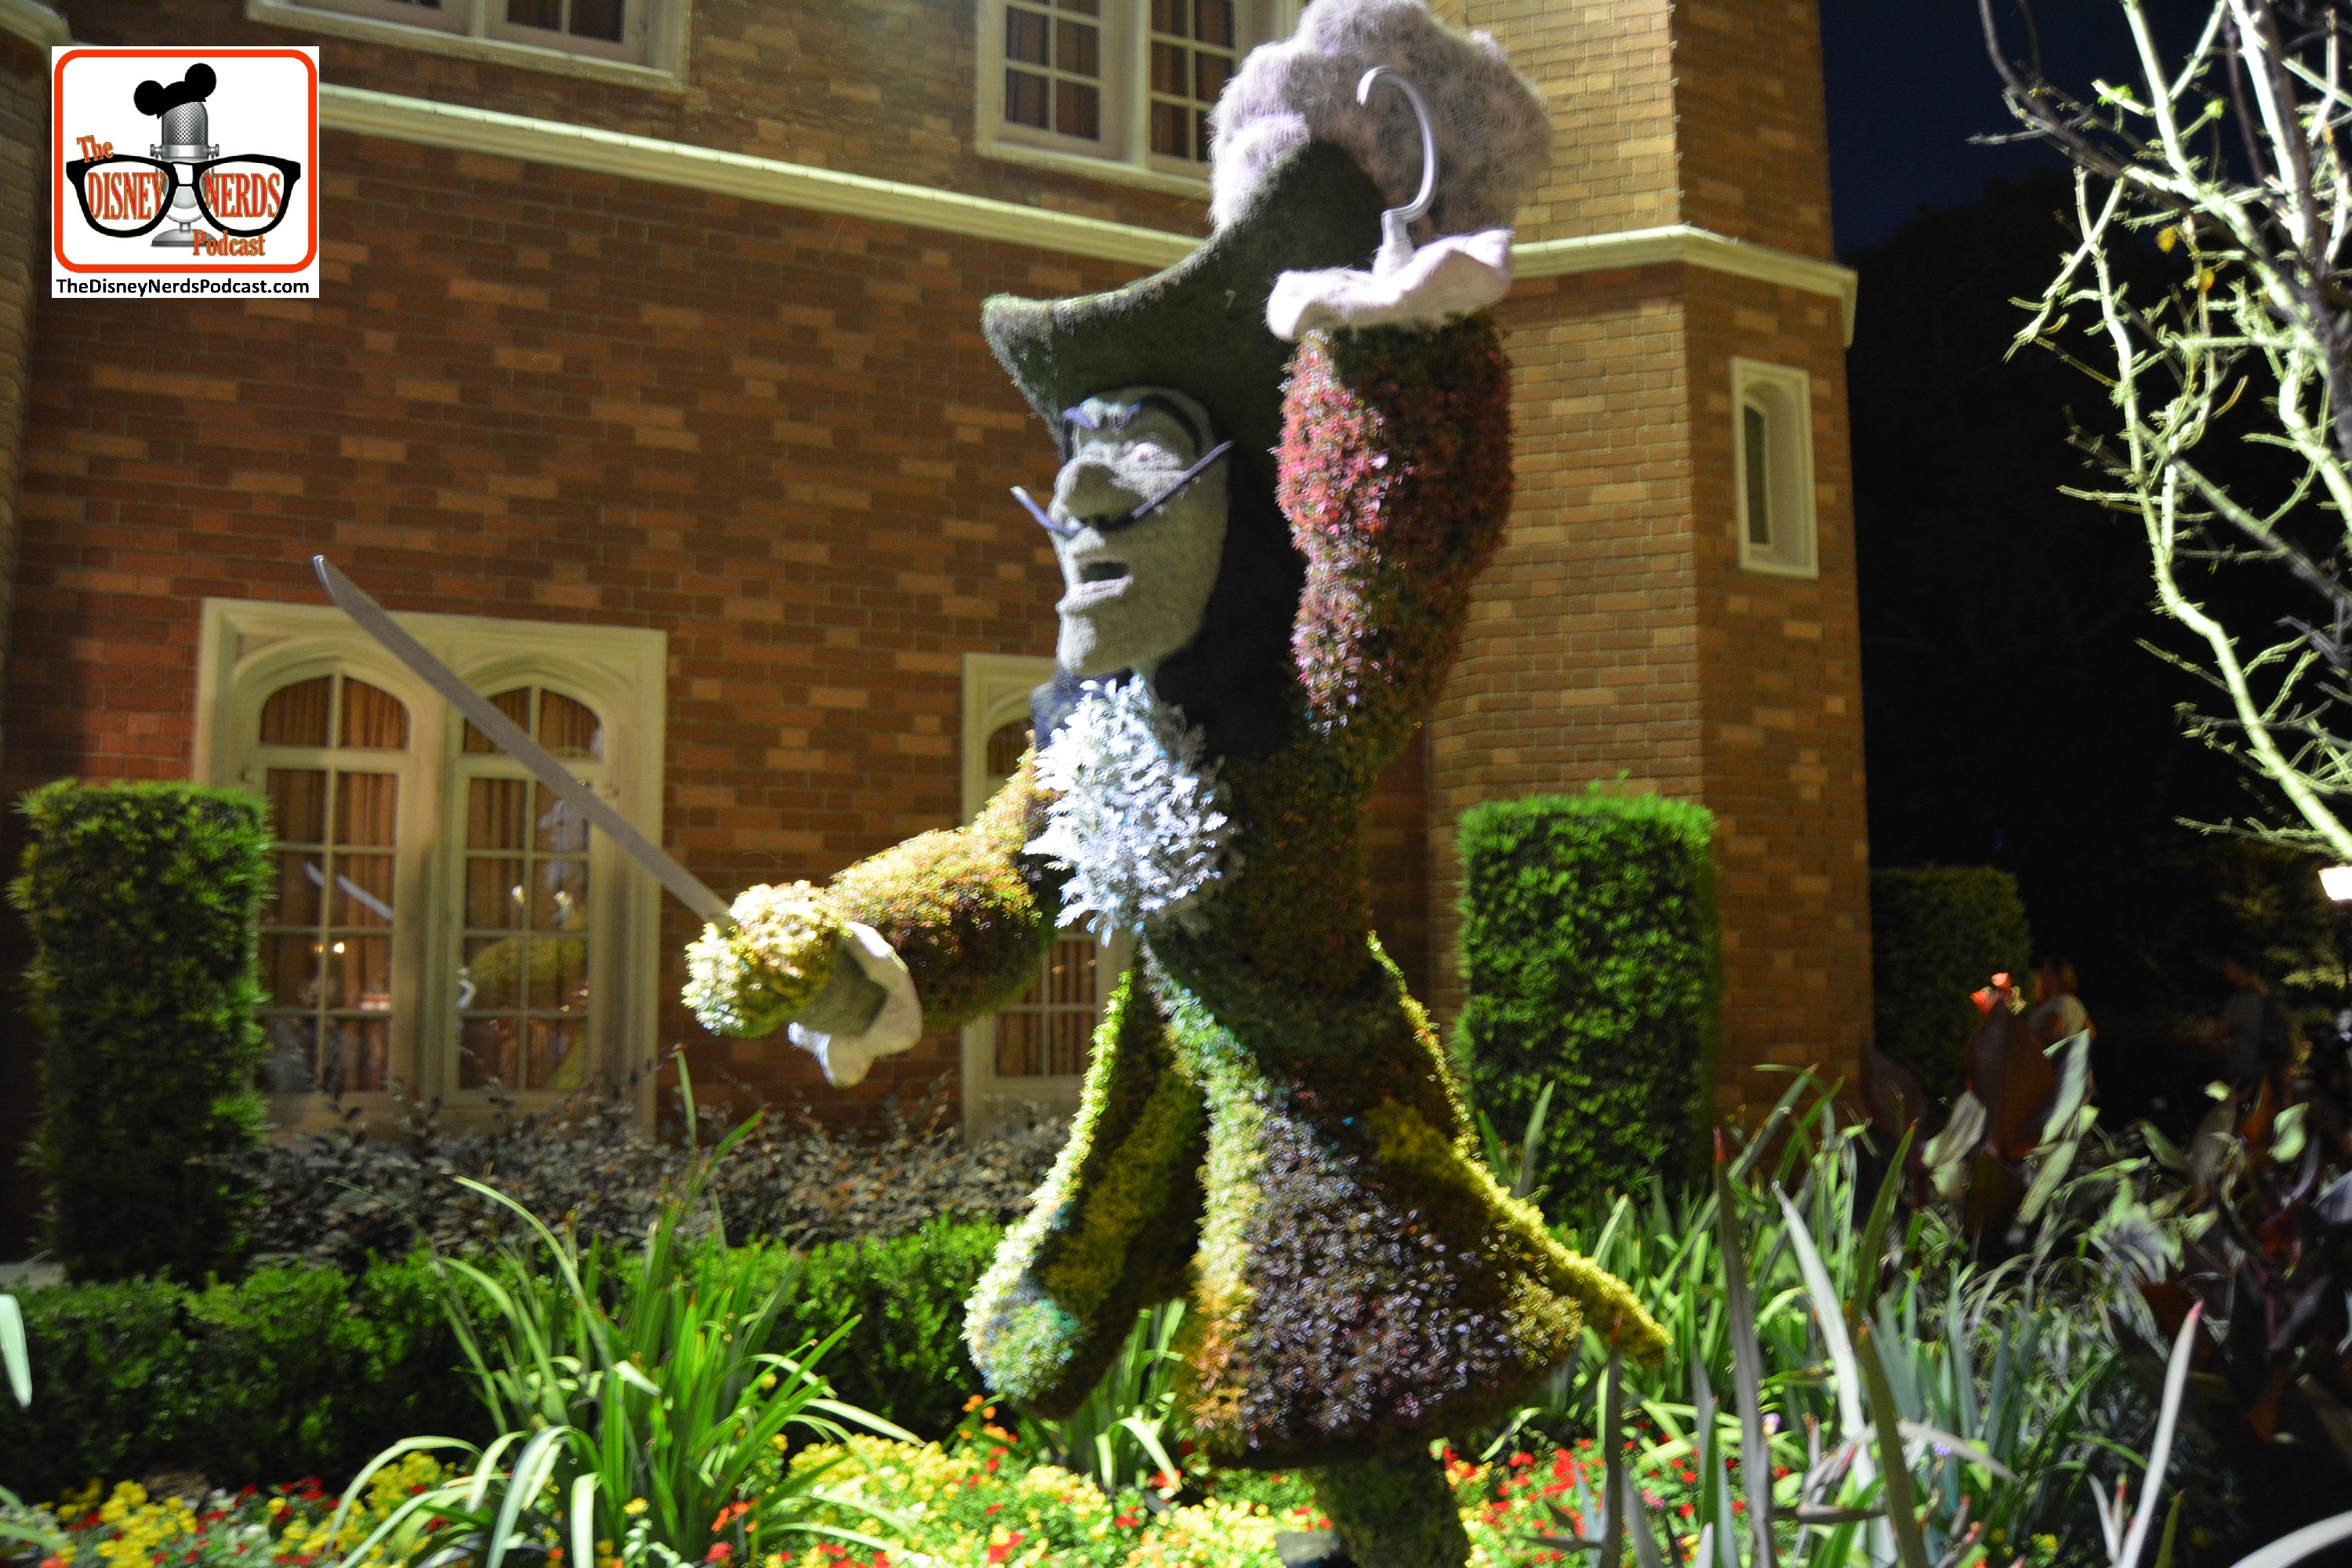 DNP April 2016 Photo Report: Epcot Flower and Garden Festival - Topiaries at night